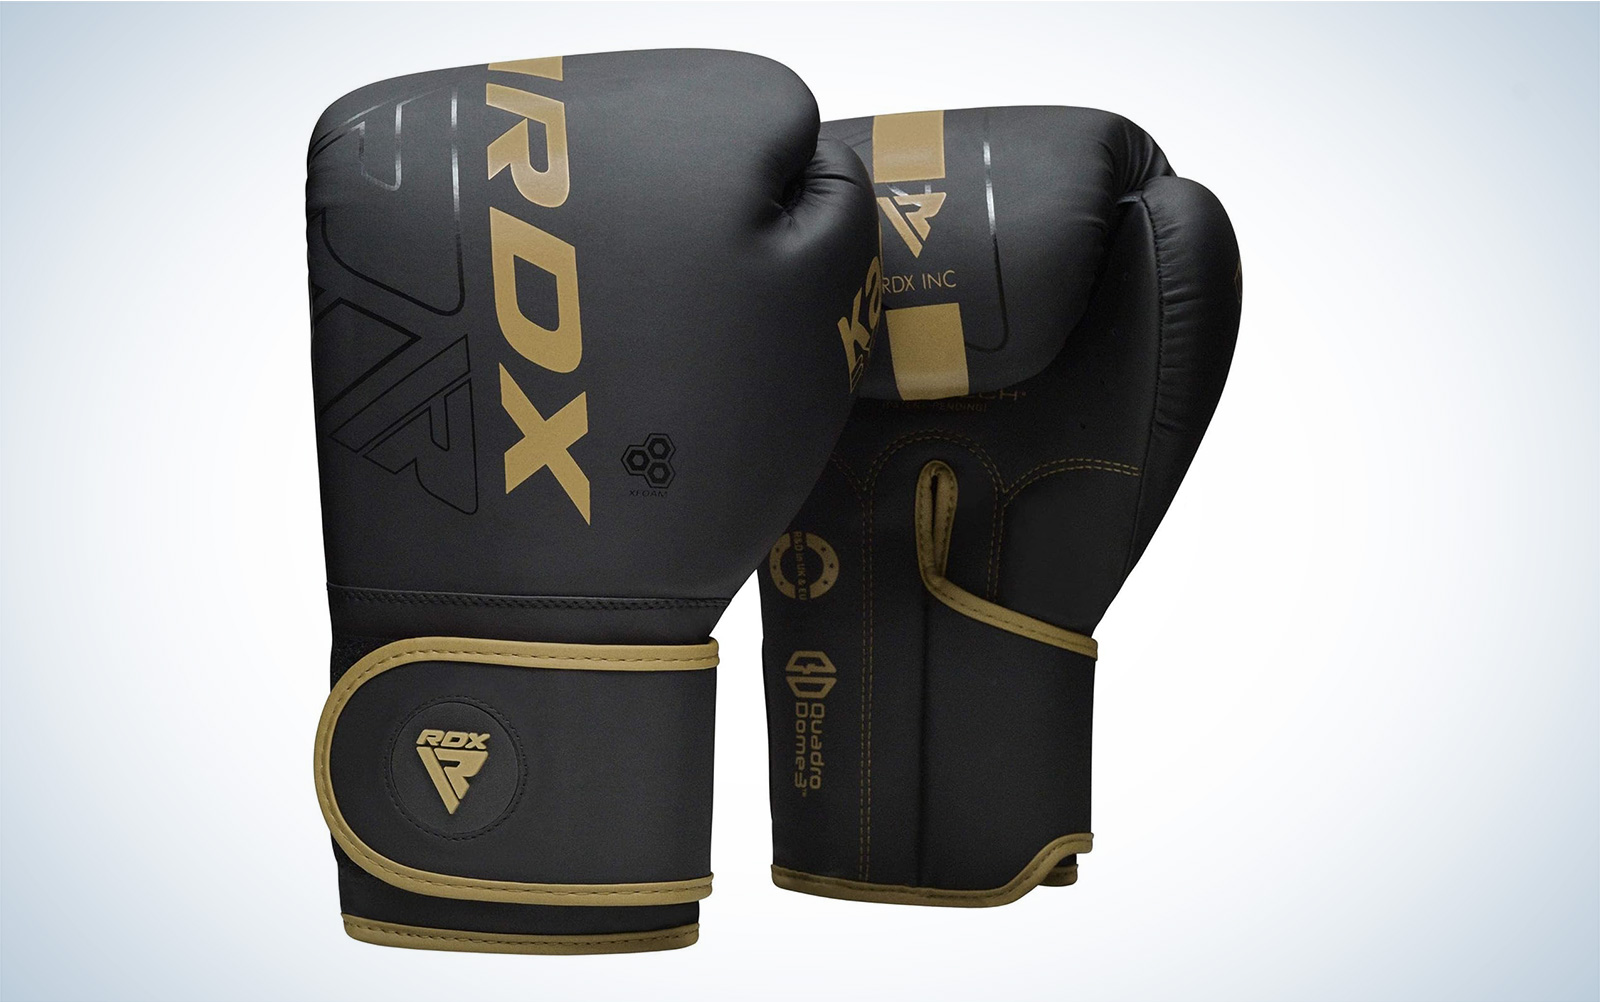 RDX makes some of the best boxing gloves on a budget